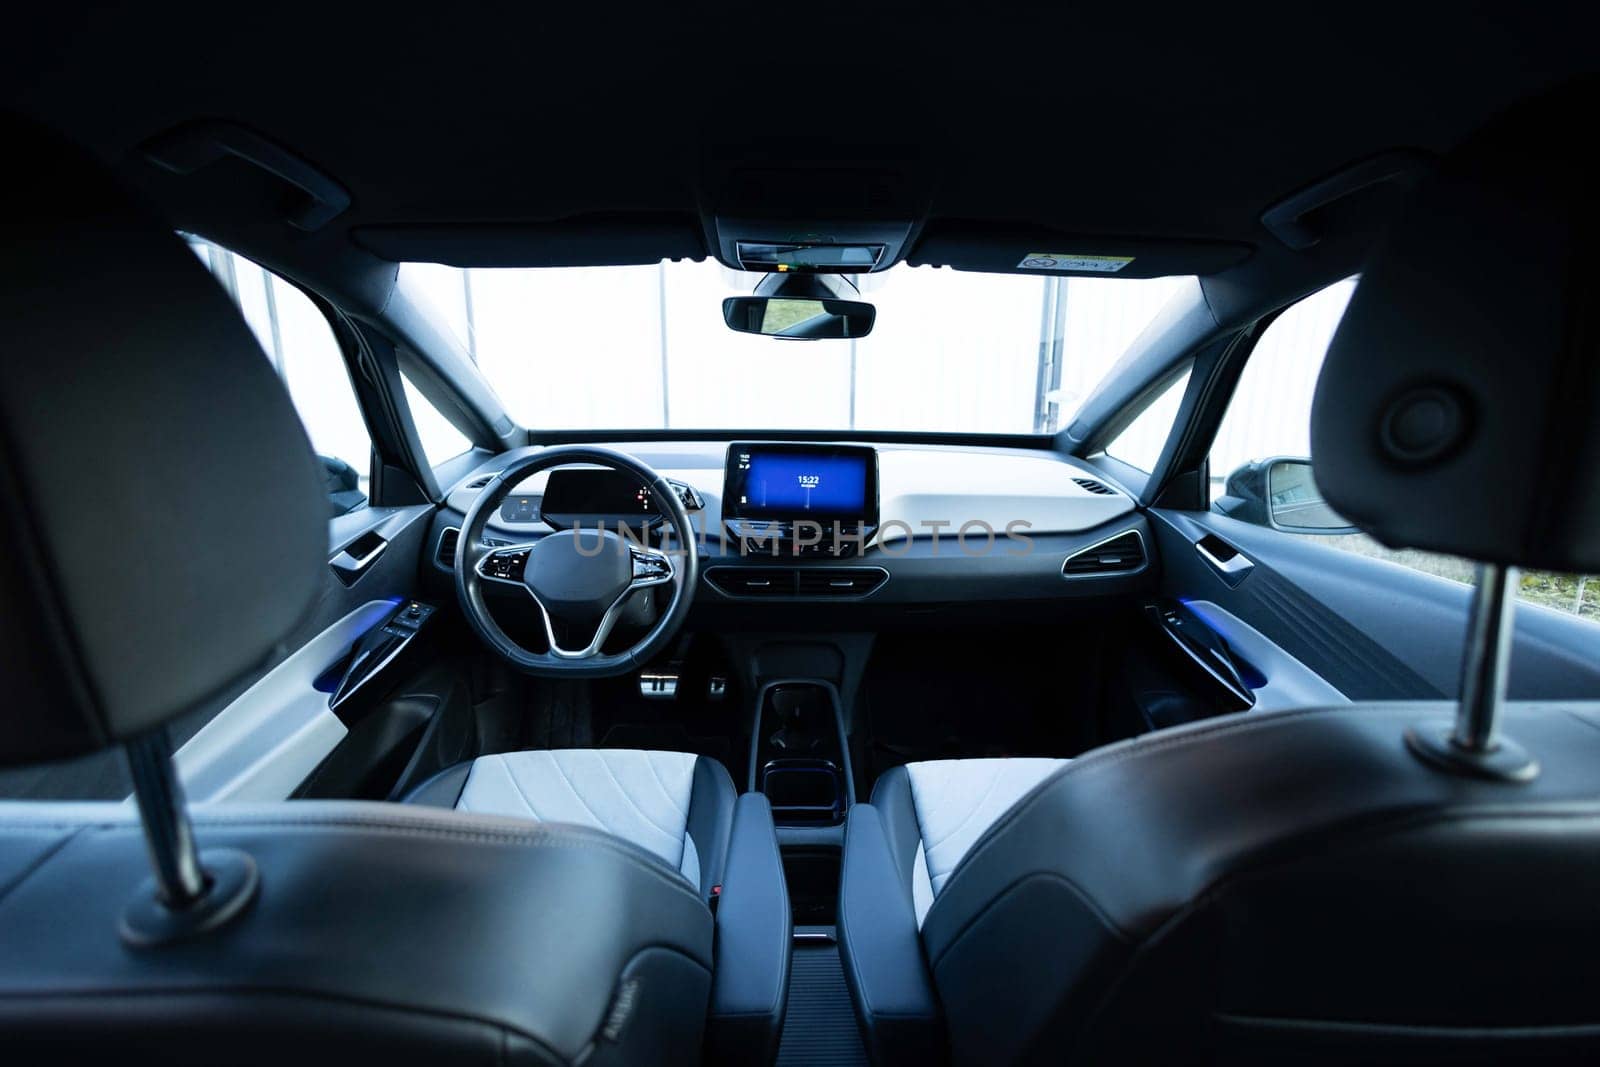 Electric car interior details adjustments. Inside car interior with front seats, driver and passenger, textile, multimedia, windows, console, gear shift, electric buttons, digital speedometer by uflypro